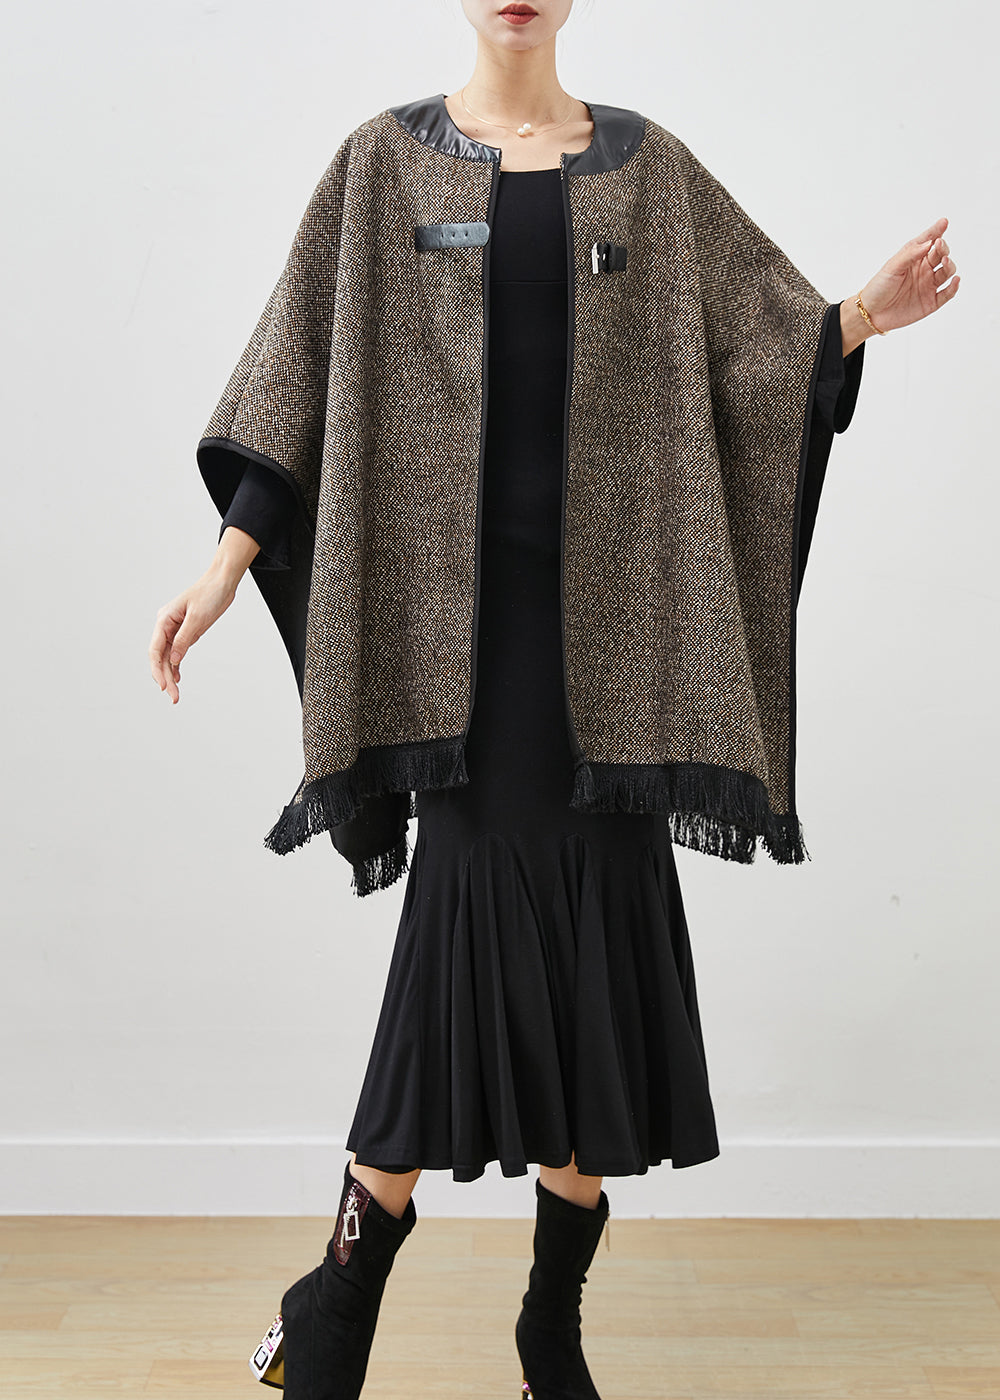 French Grey Tasseled Woolen Coats Two Pieces Set Cloak Sleeves